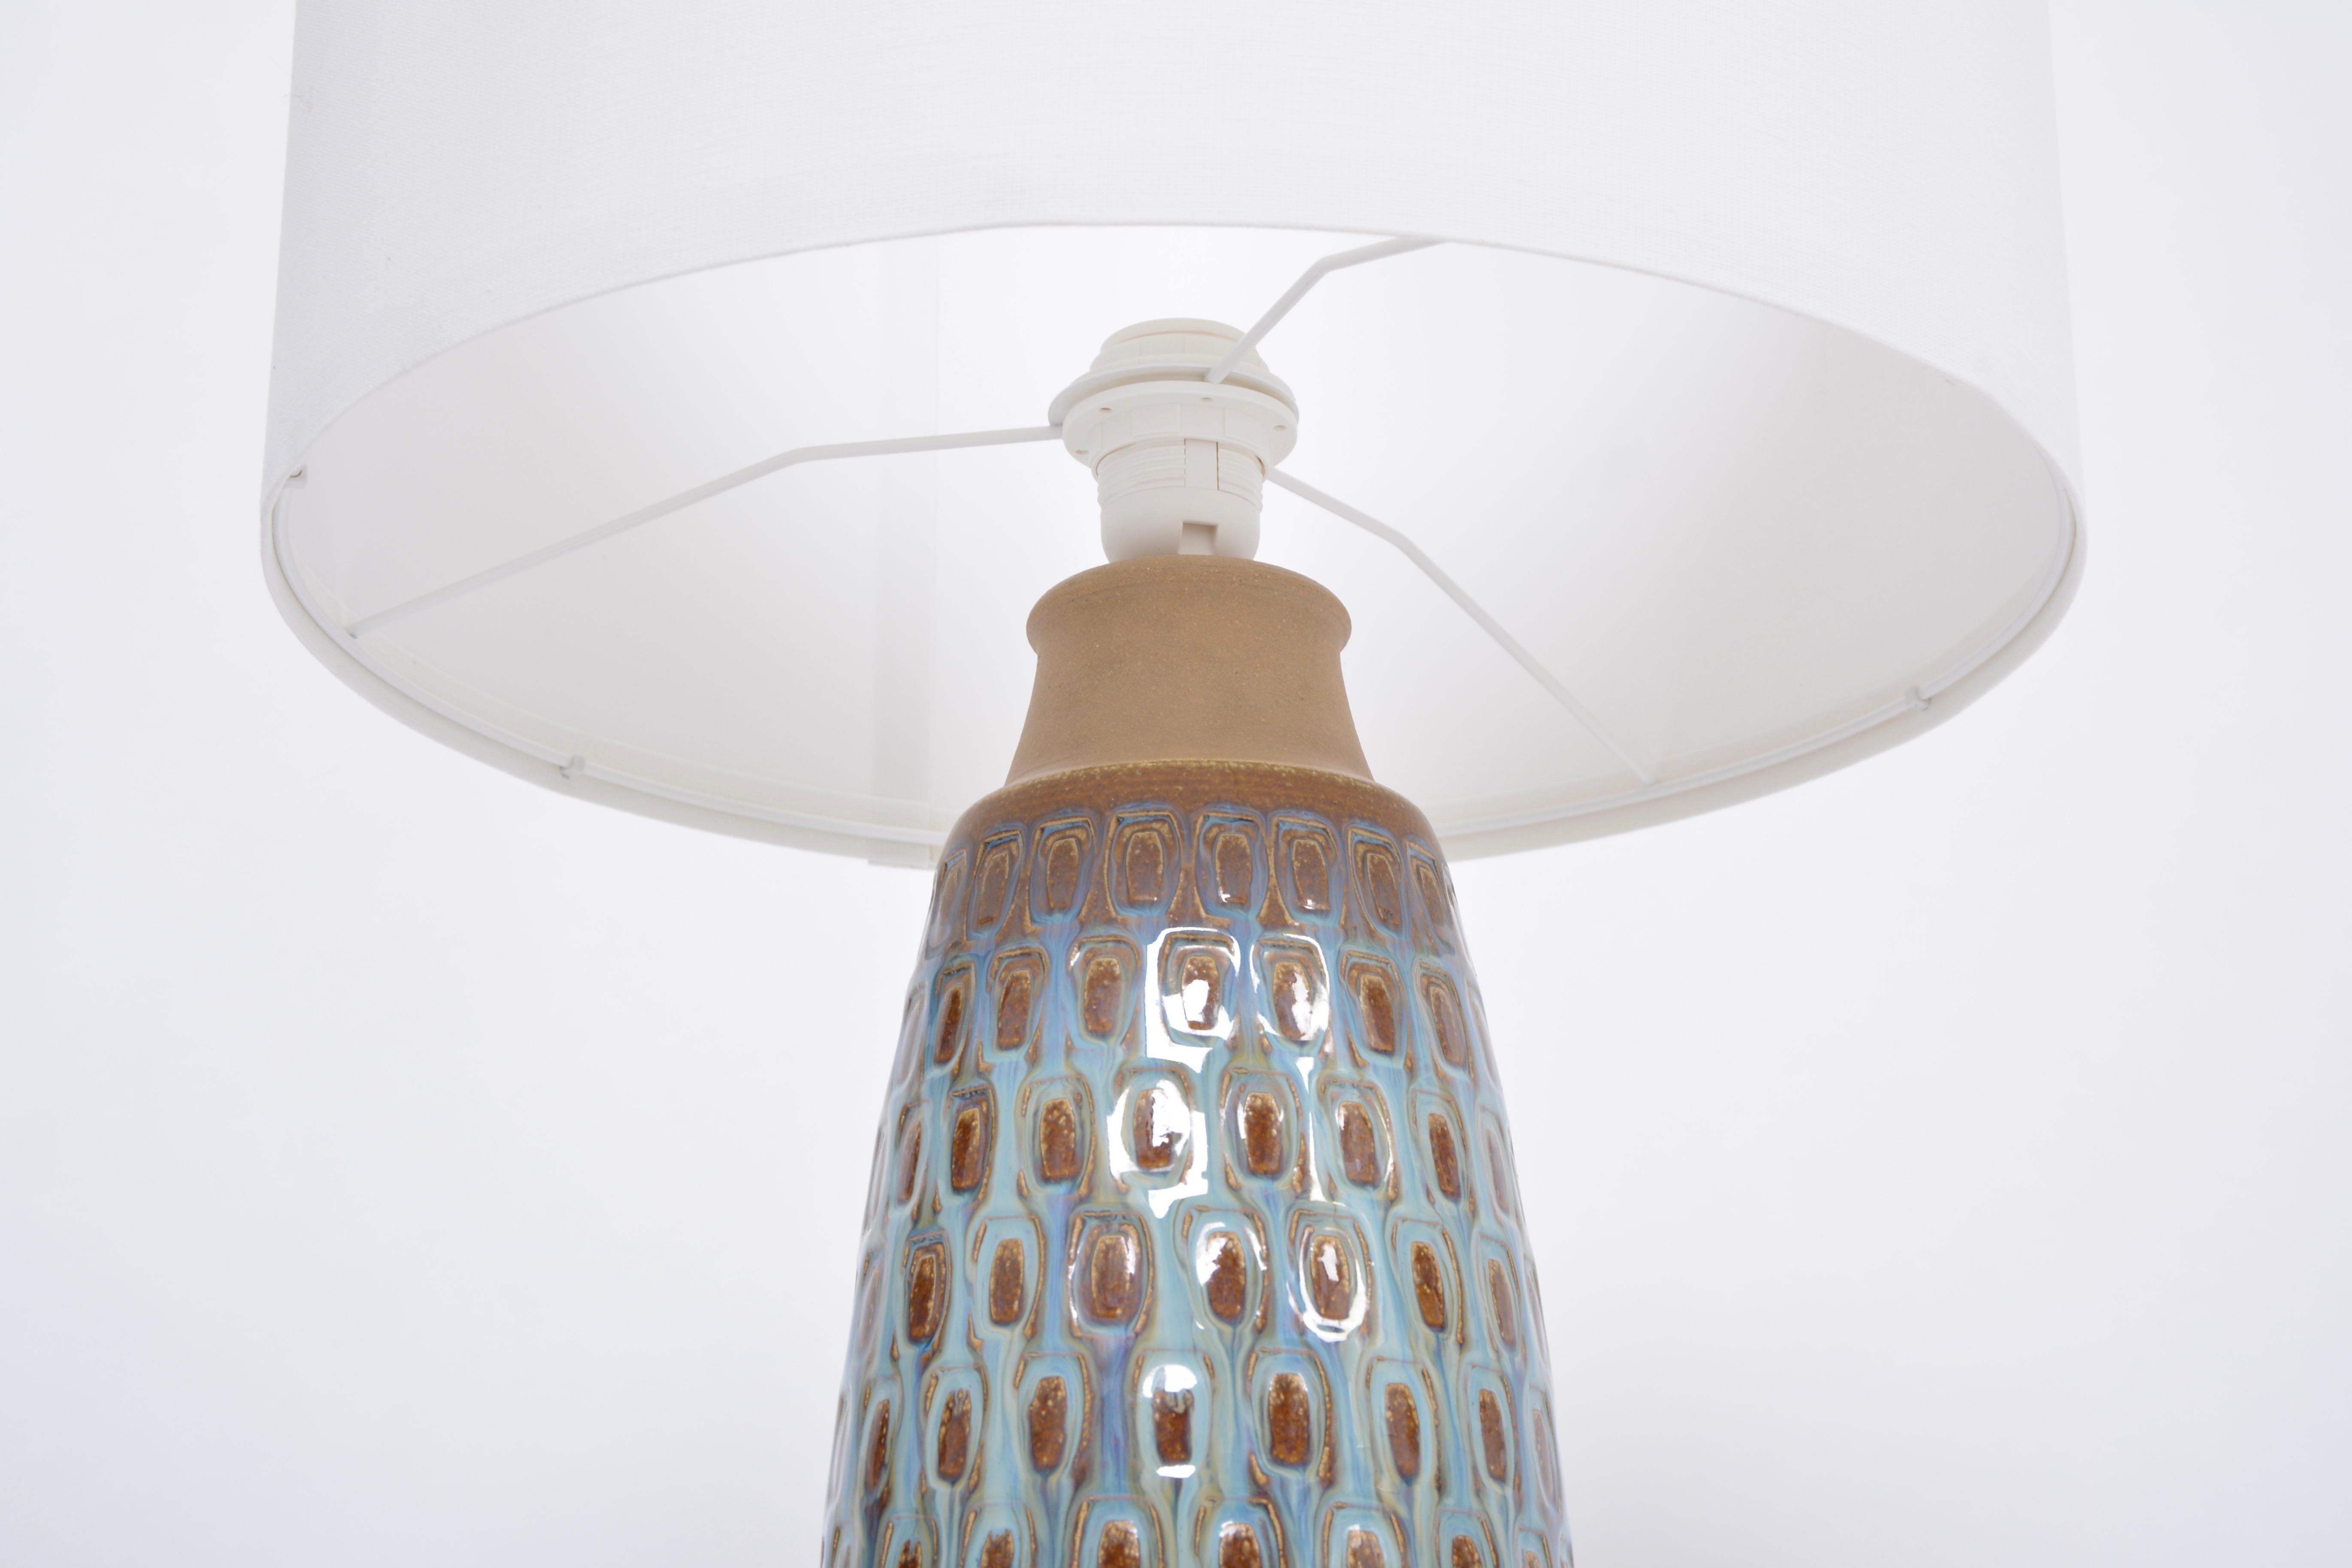 Tall Danish Mid-Century Modern Ceramic Table Lamp Model 3017 by Soholm In Good Condition For Sale In Berlin, DE